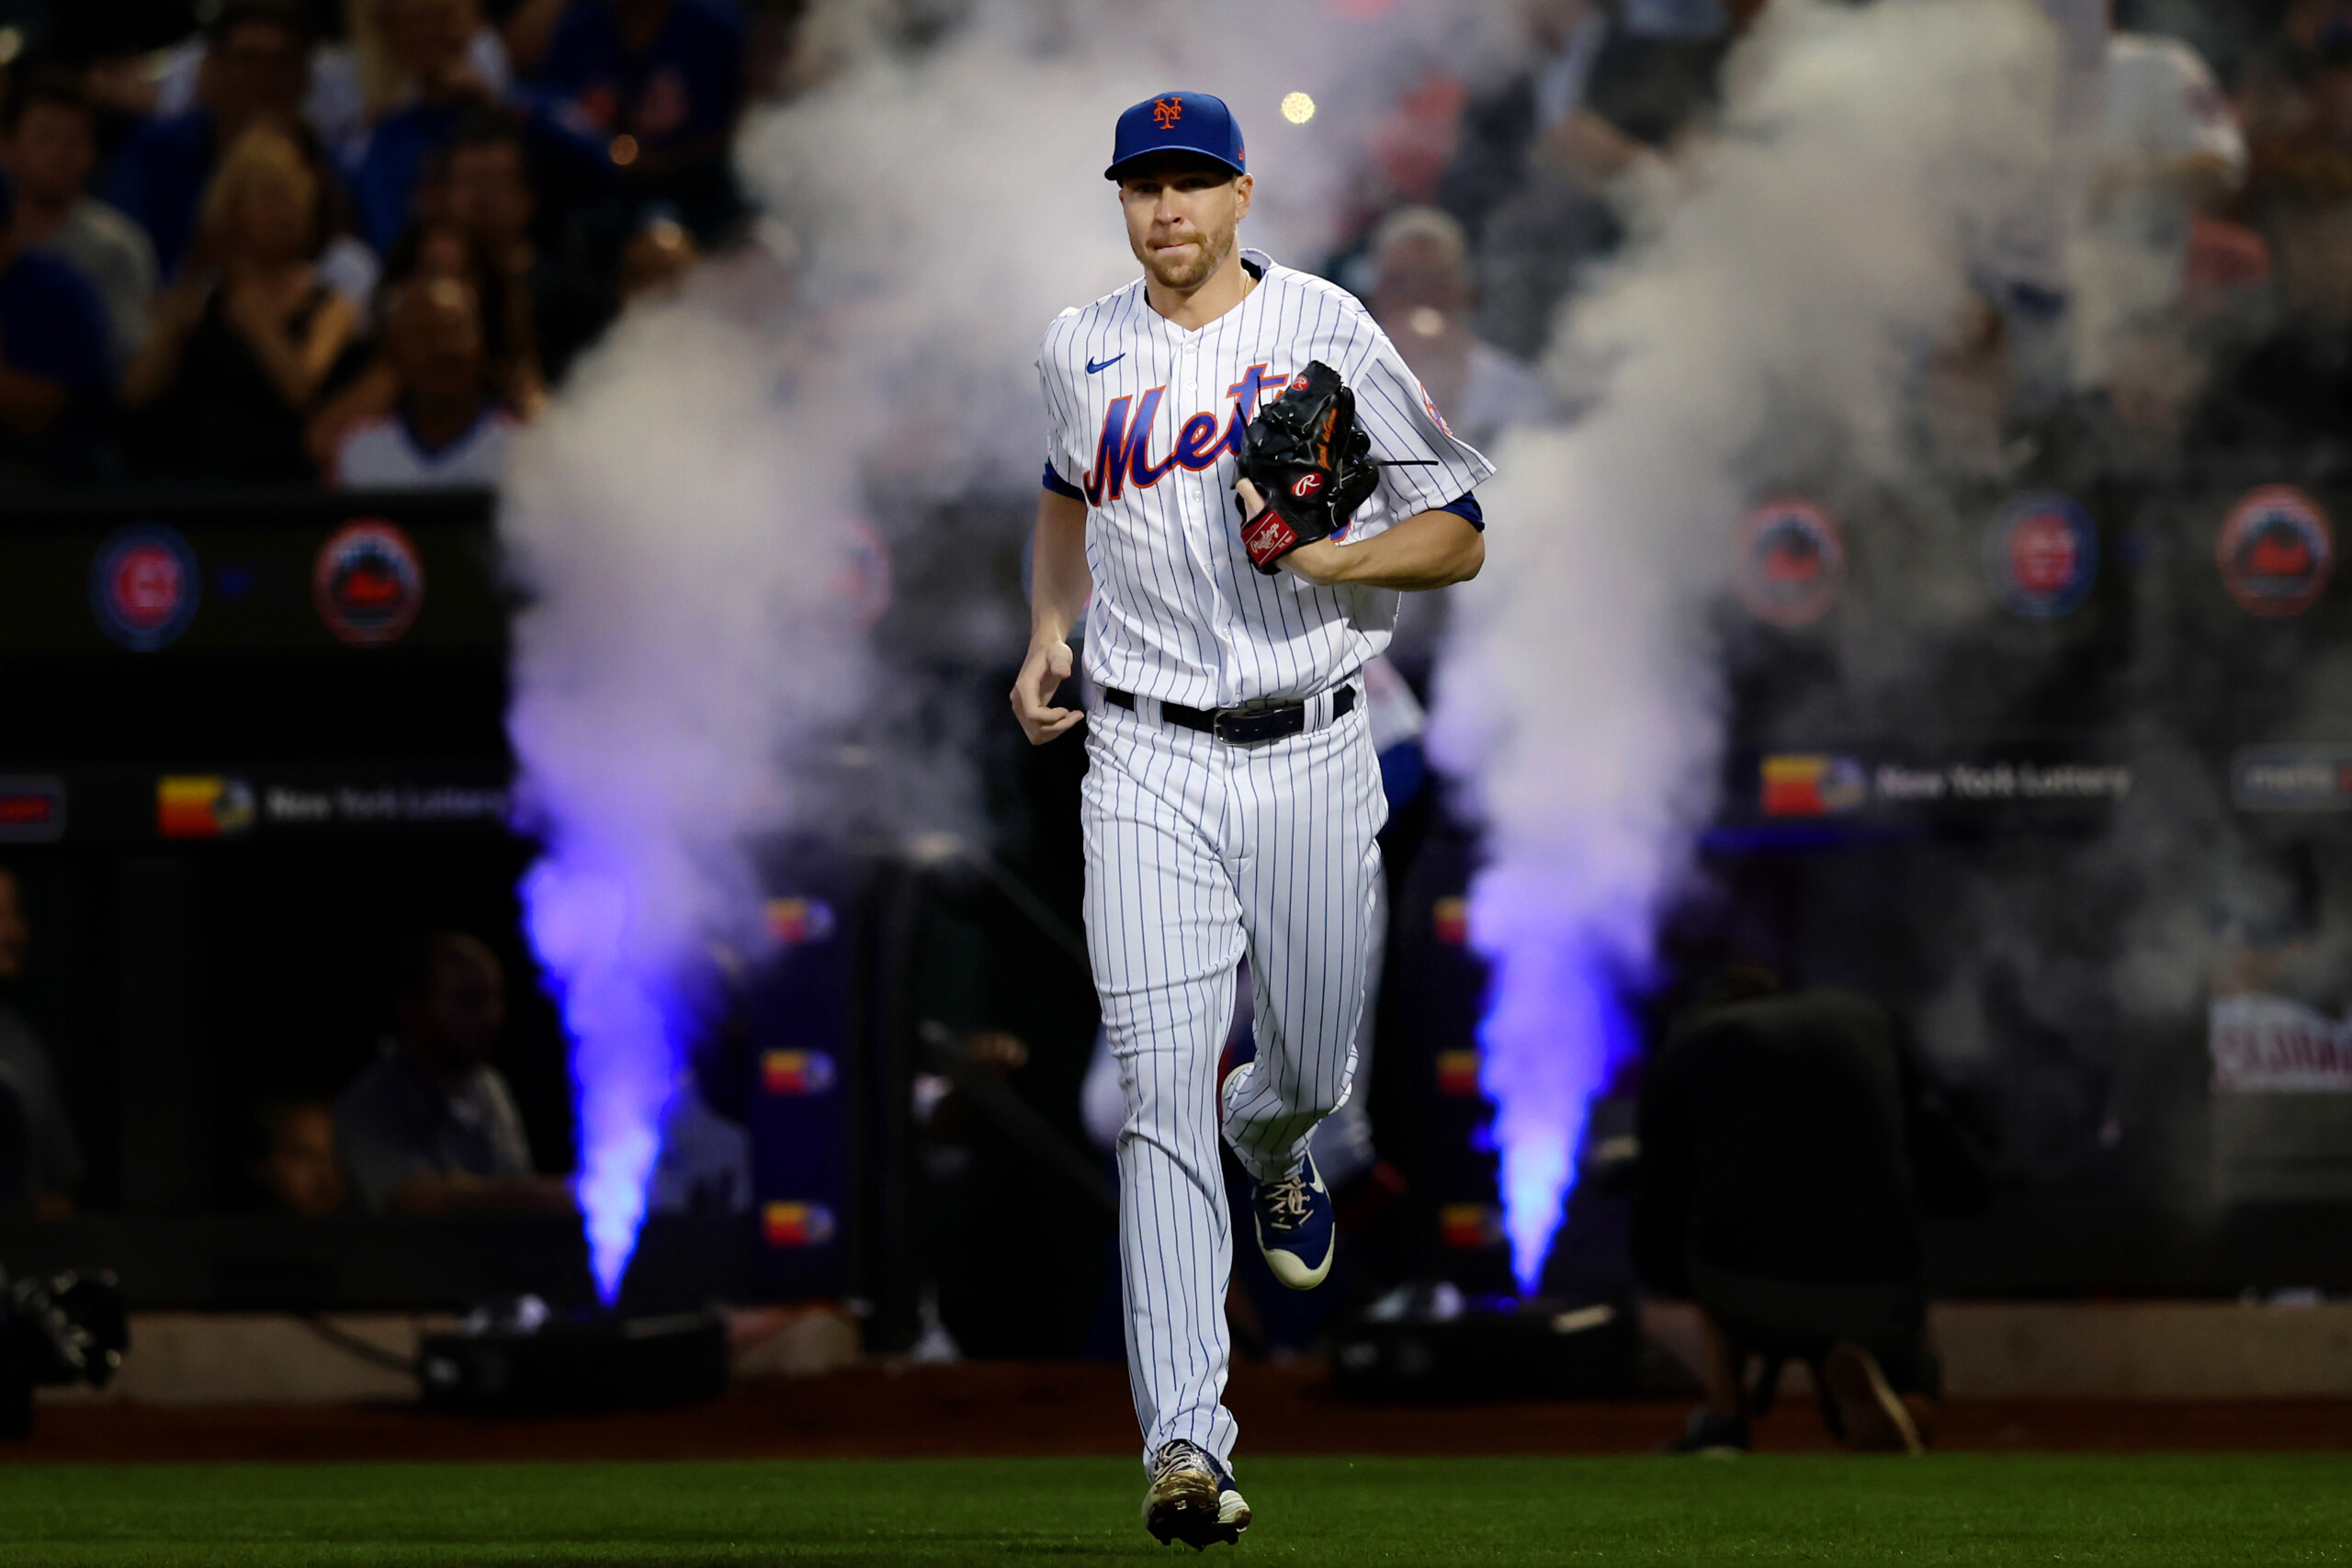 Coach's decision to move Jacob deGrom from shortstop to pitcher